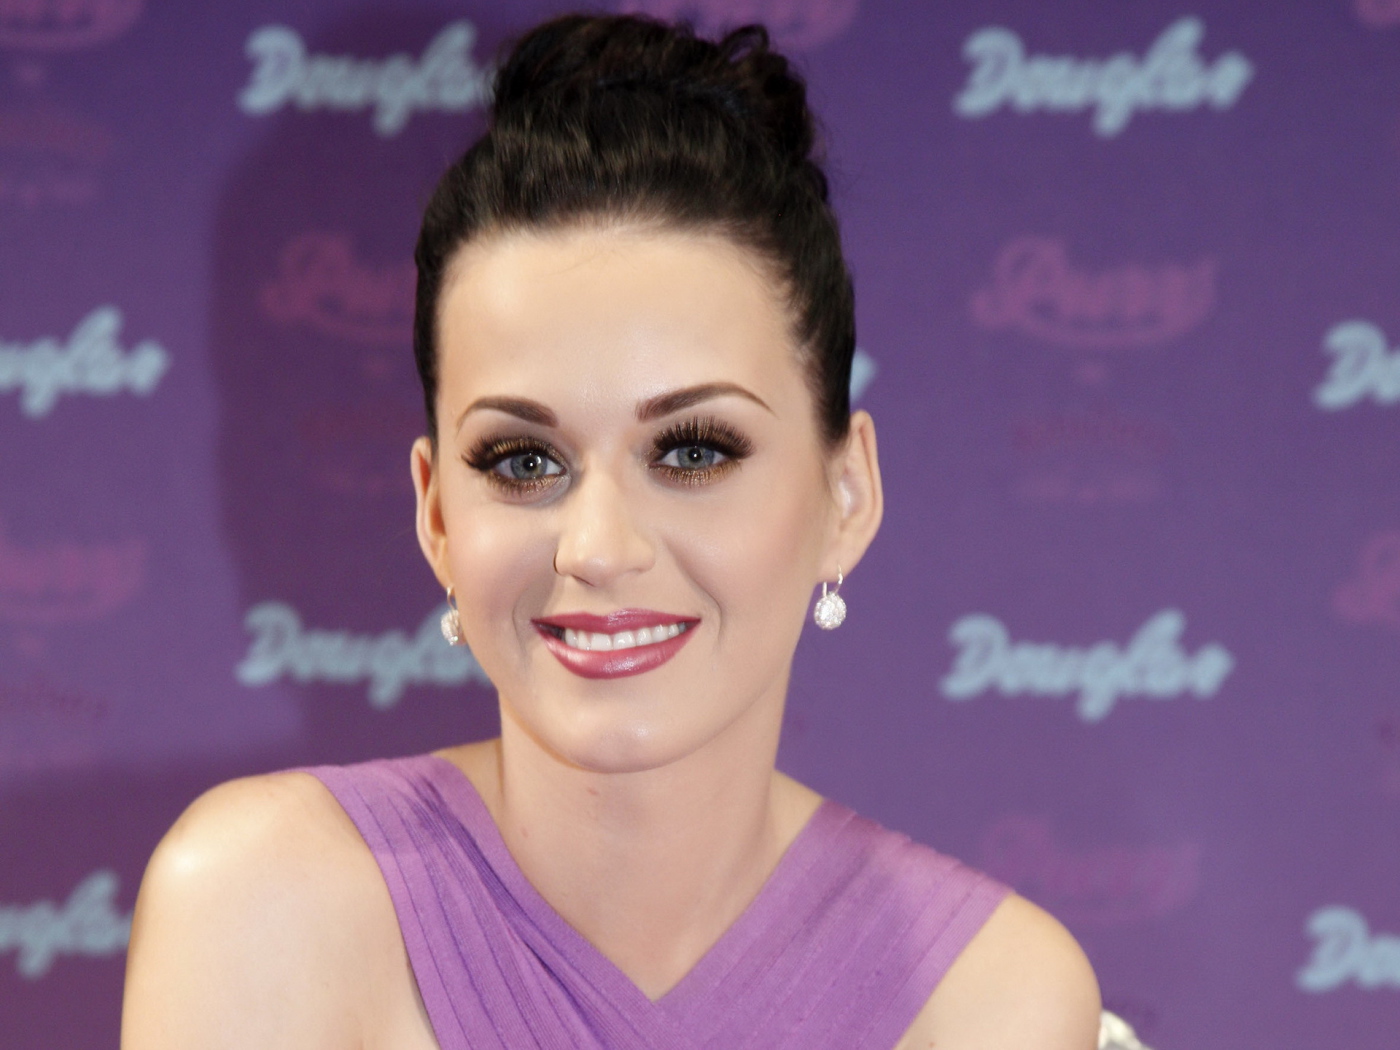 Singer Katy Perry at the press conference